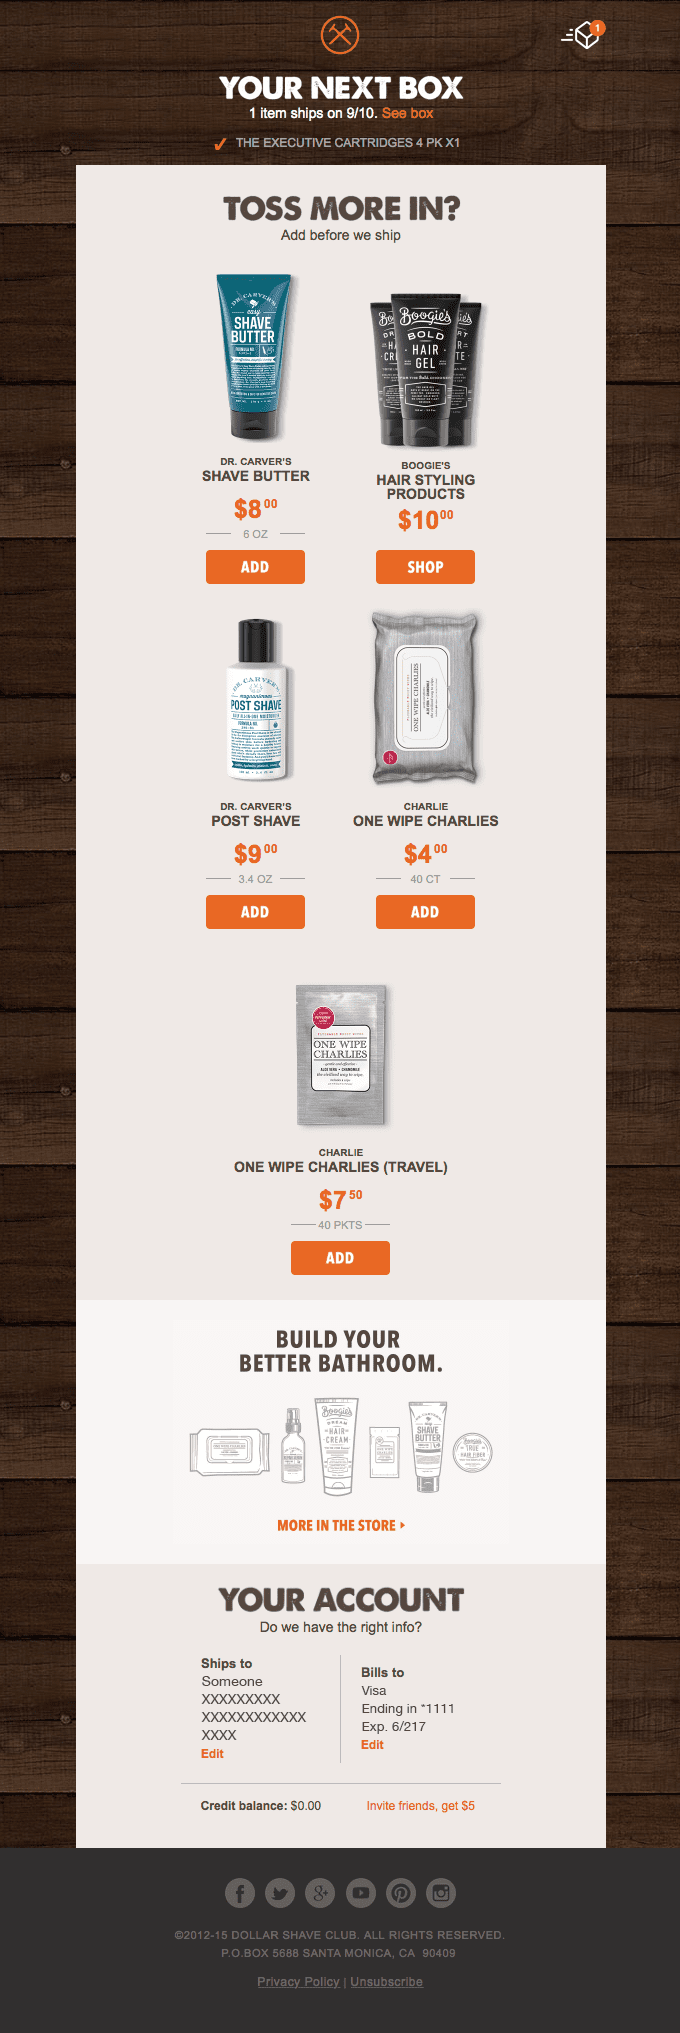 Dollar Shave Club Upsell Email